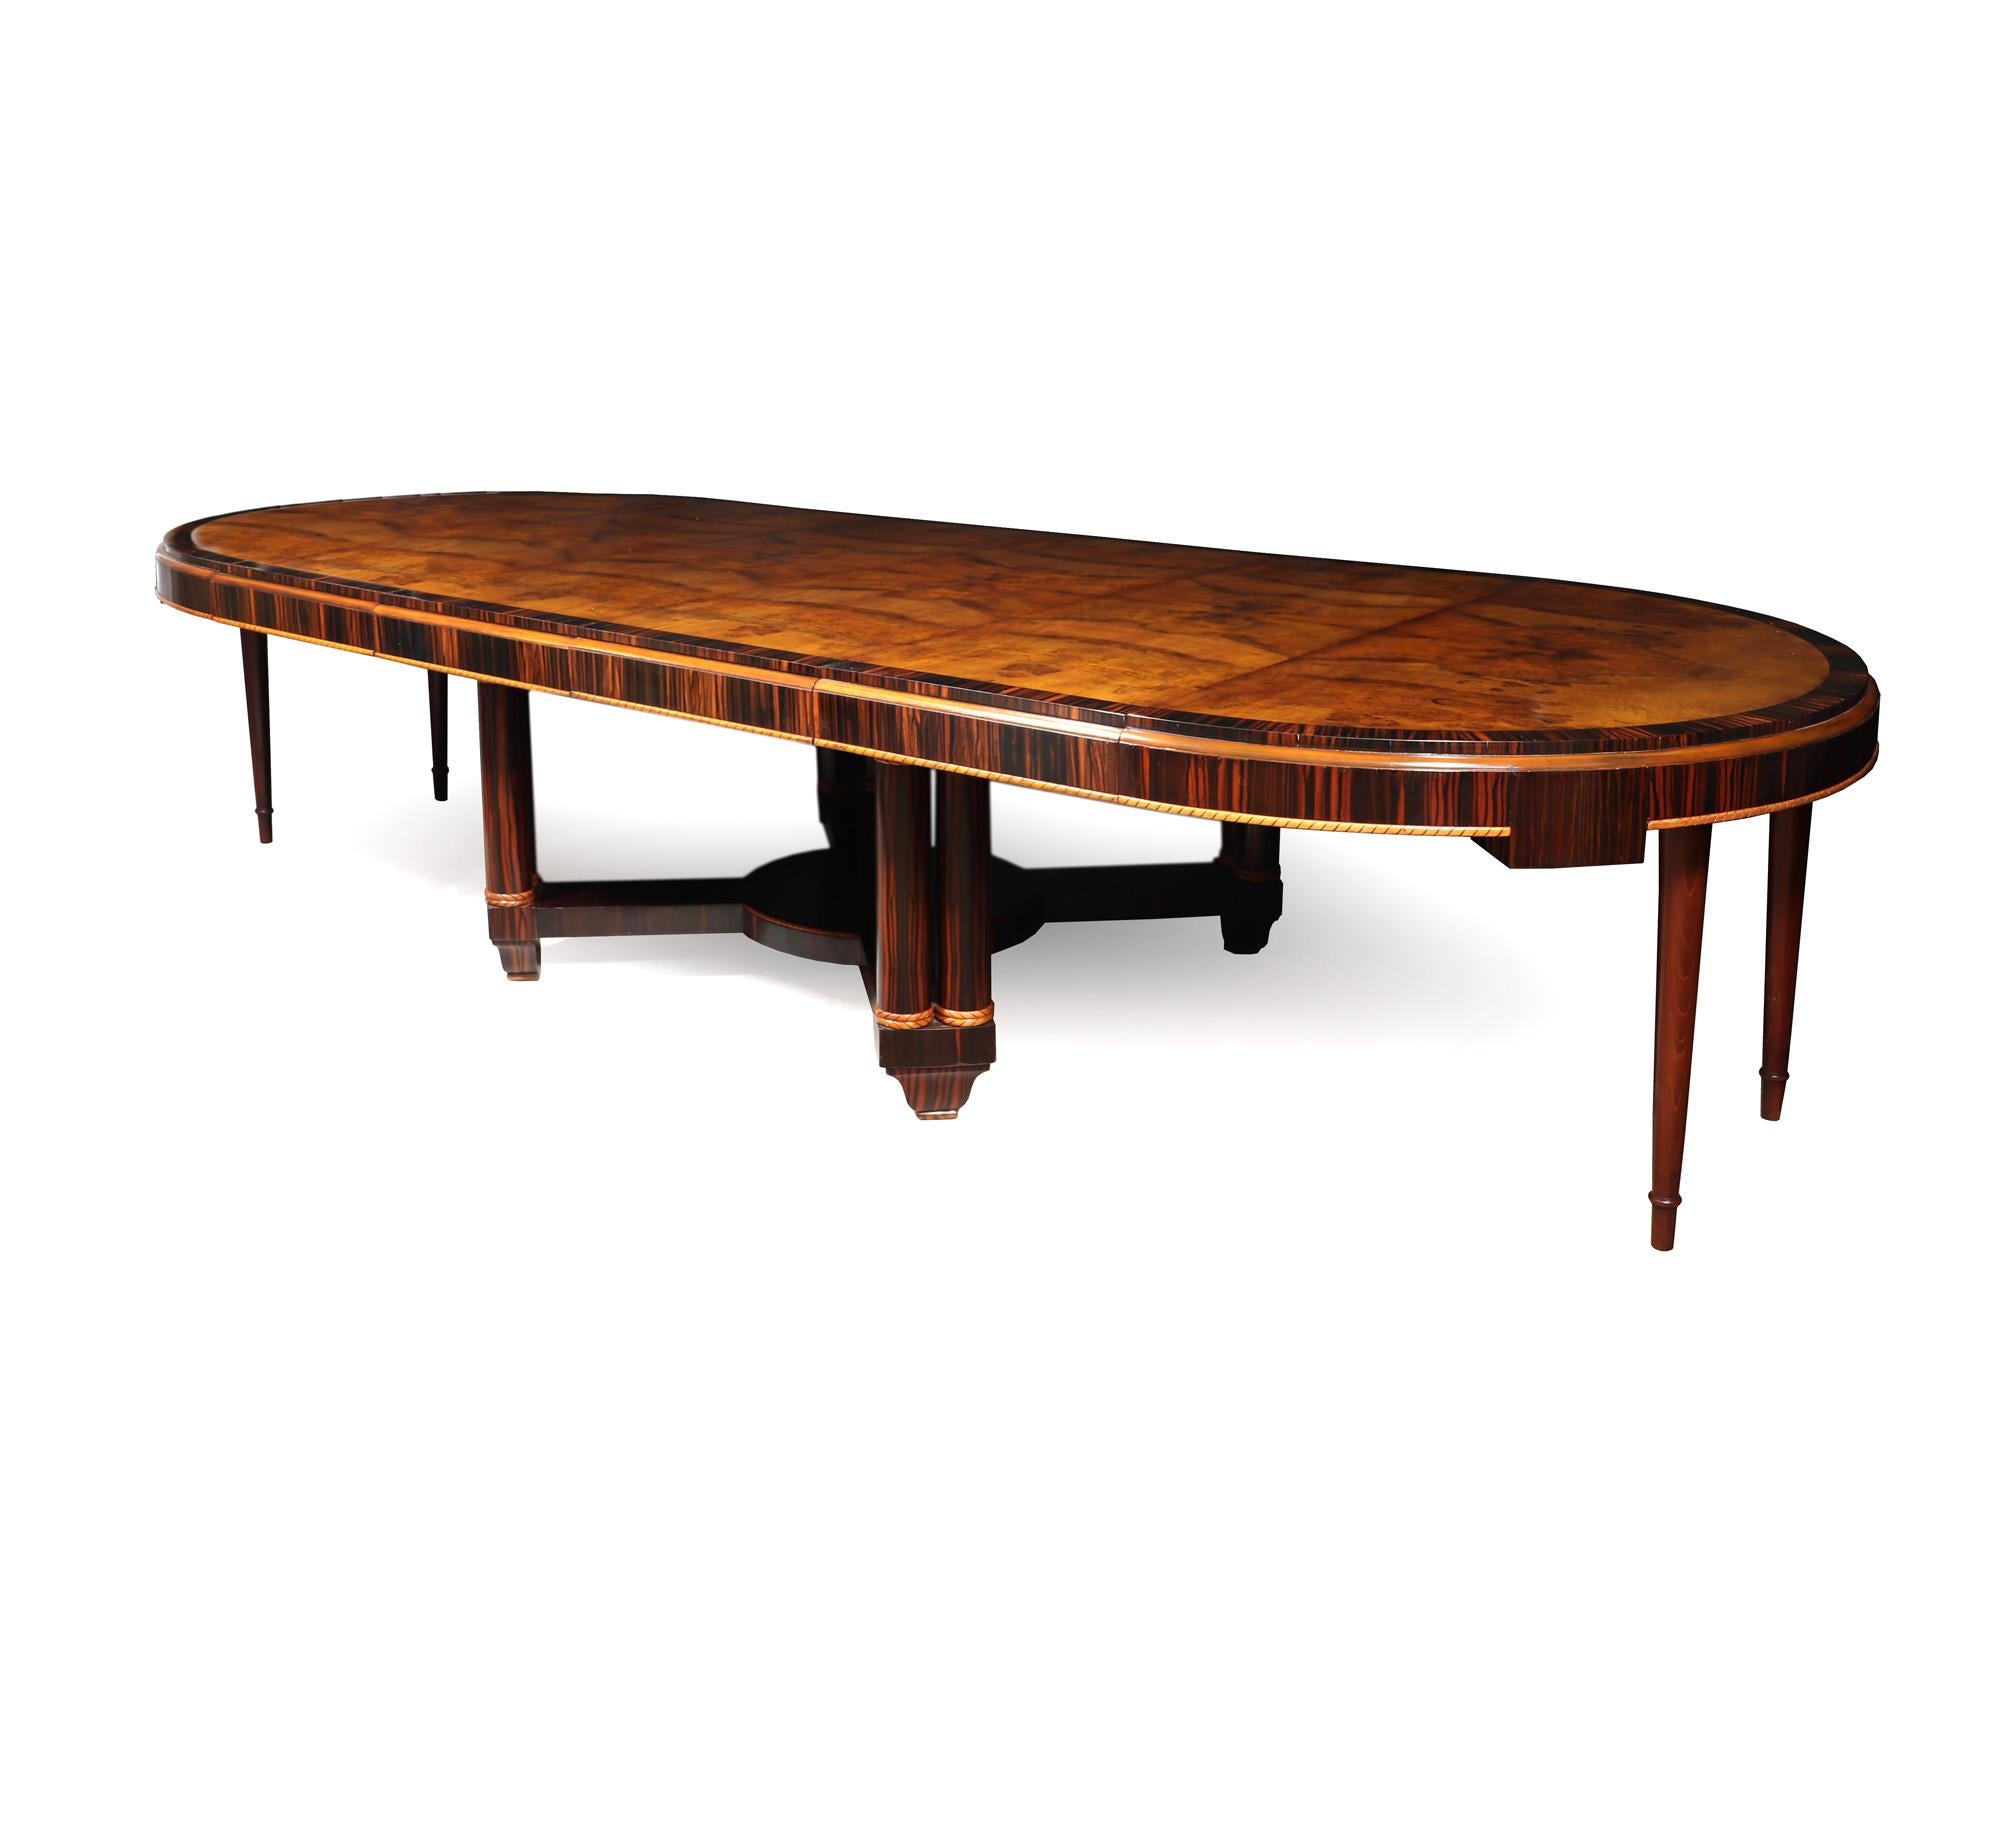 ART DECO DINING TABLE 
A truly exquisite French Art Deco extendable dining table from 1925. This rare beauty features a stunning circular top made of Macassar Ebony, with book matched burr walnut centre and blonde wood pie crust detailing. Standing